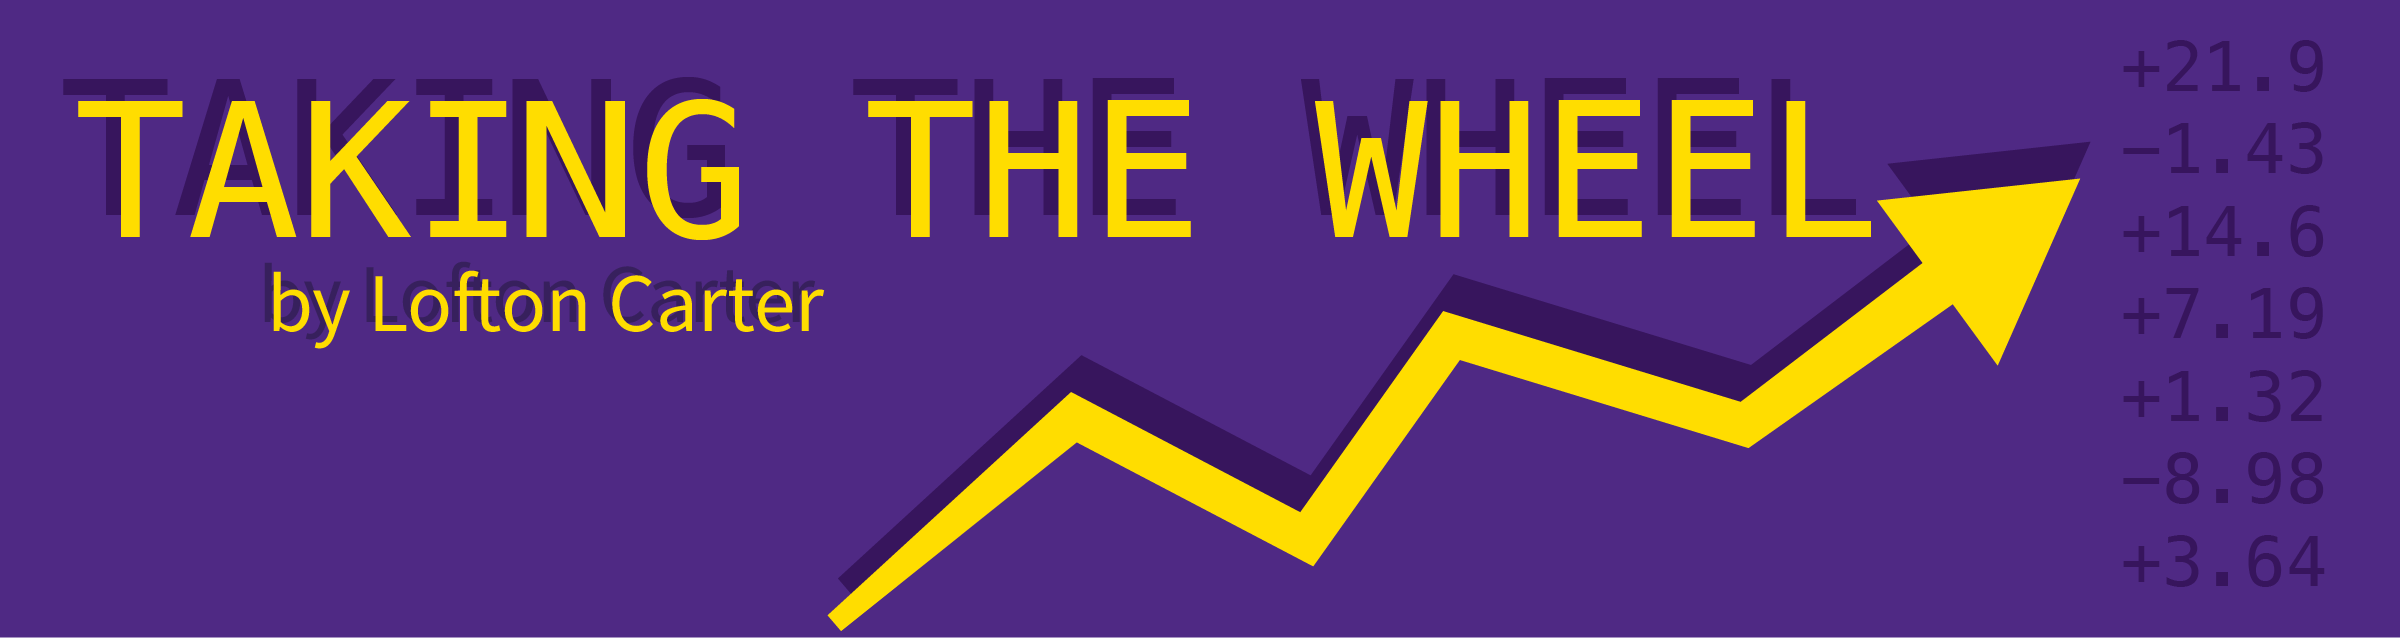 A purple graphic that looks like a stock indicator. It reads "Taking the Wheel by Lofton Carter"